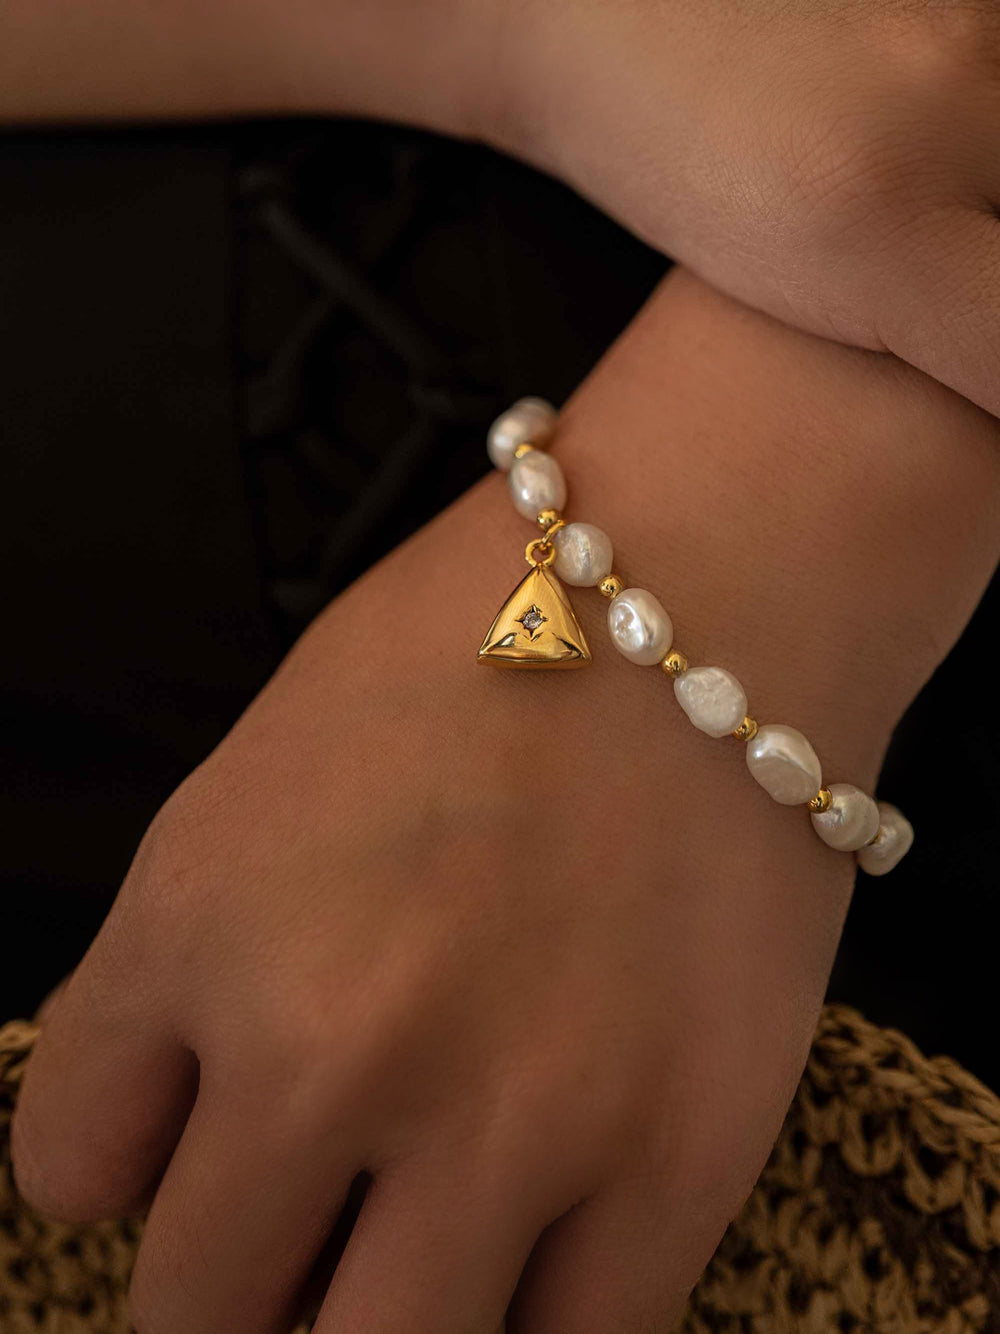 a hand wear A pearl bracelet with a triangular pendant